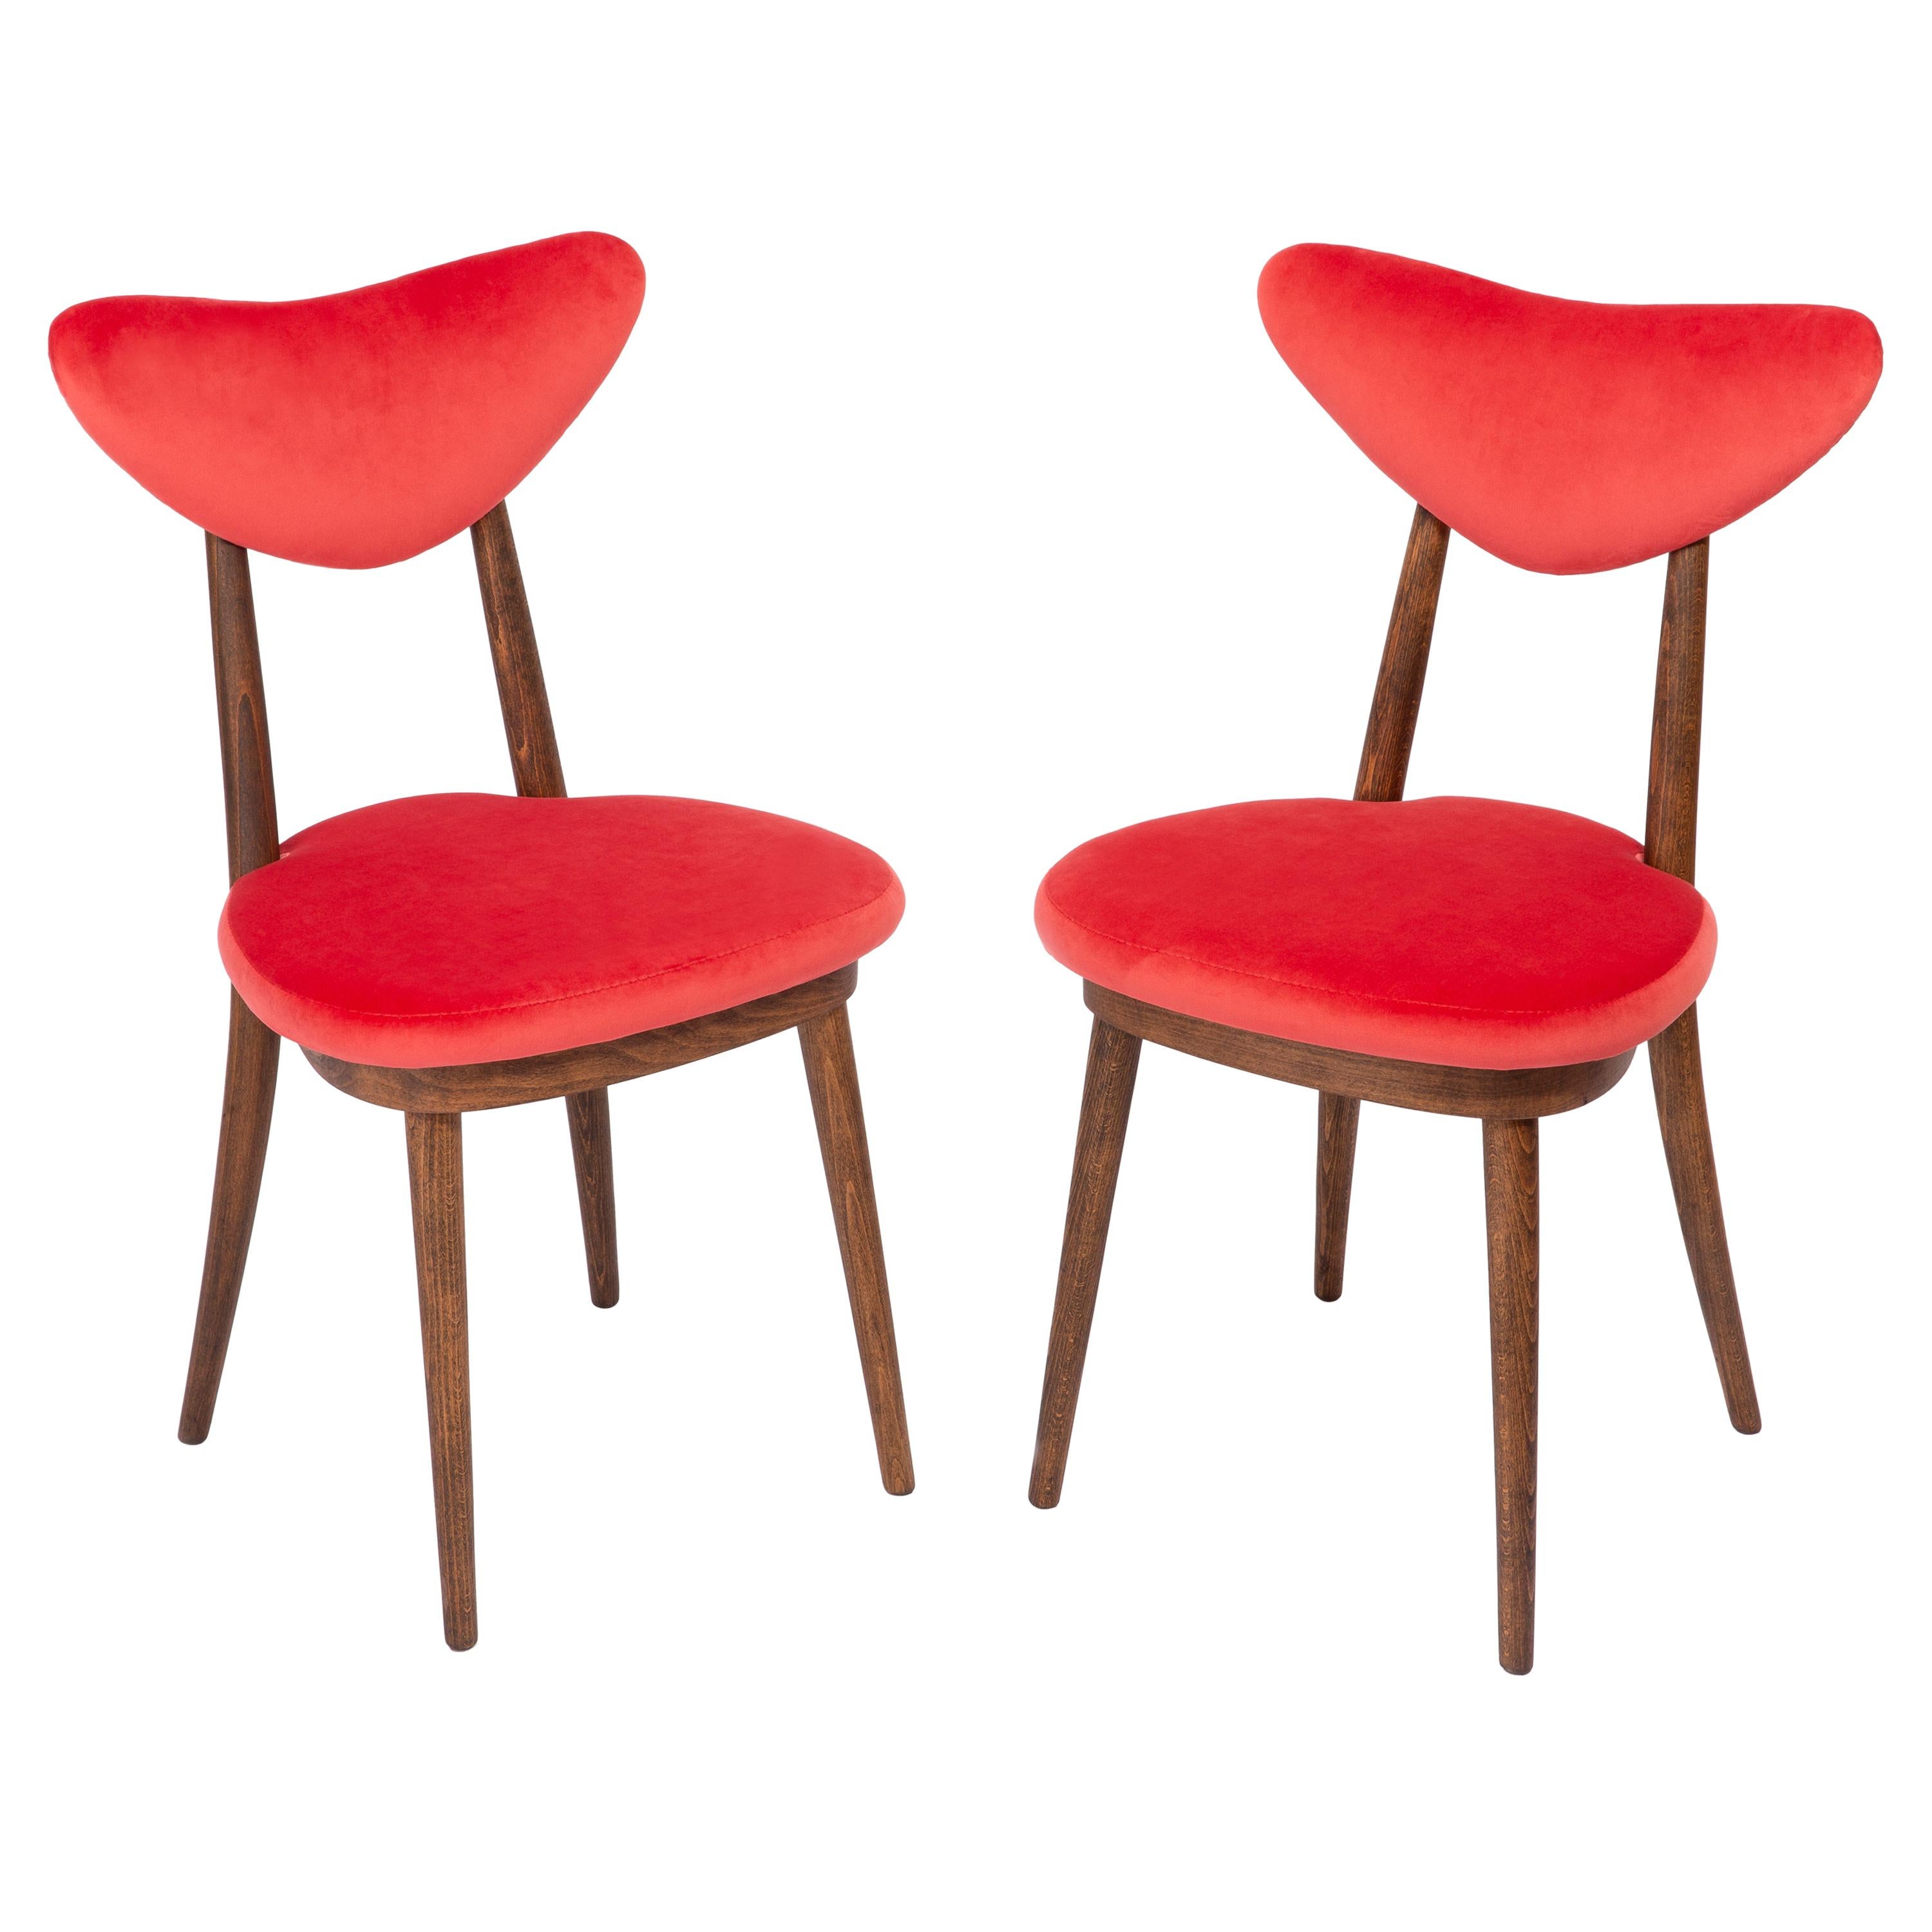 Set of Two Red Heart Chairs, Poland, 1960s